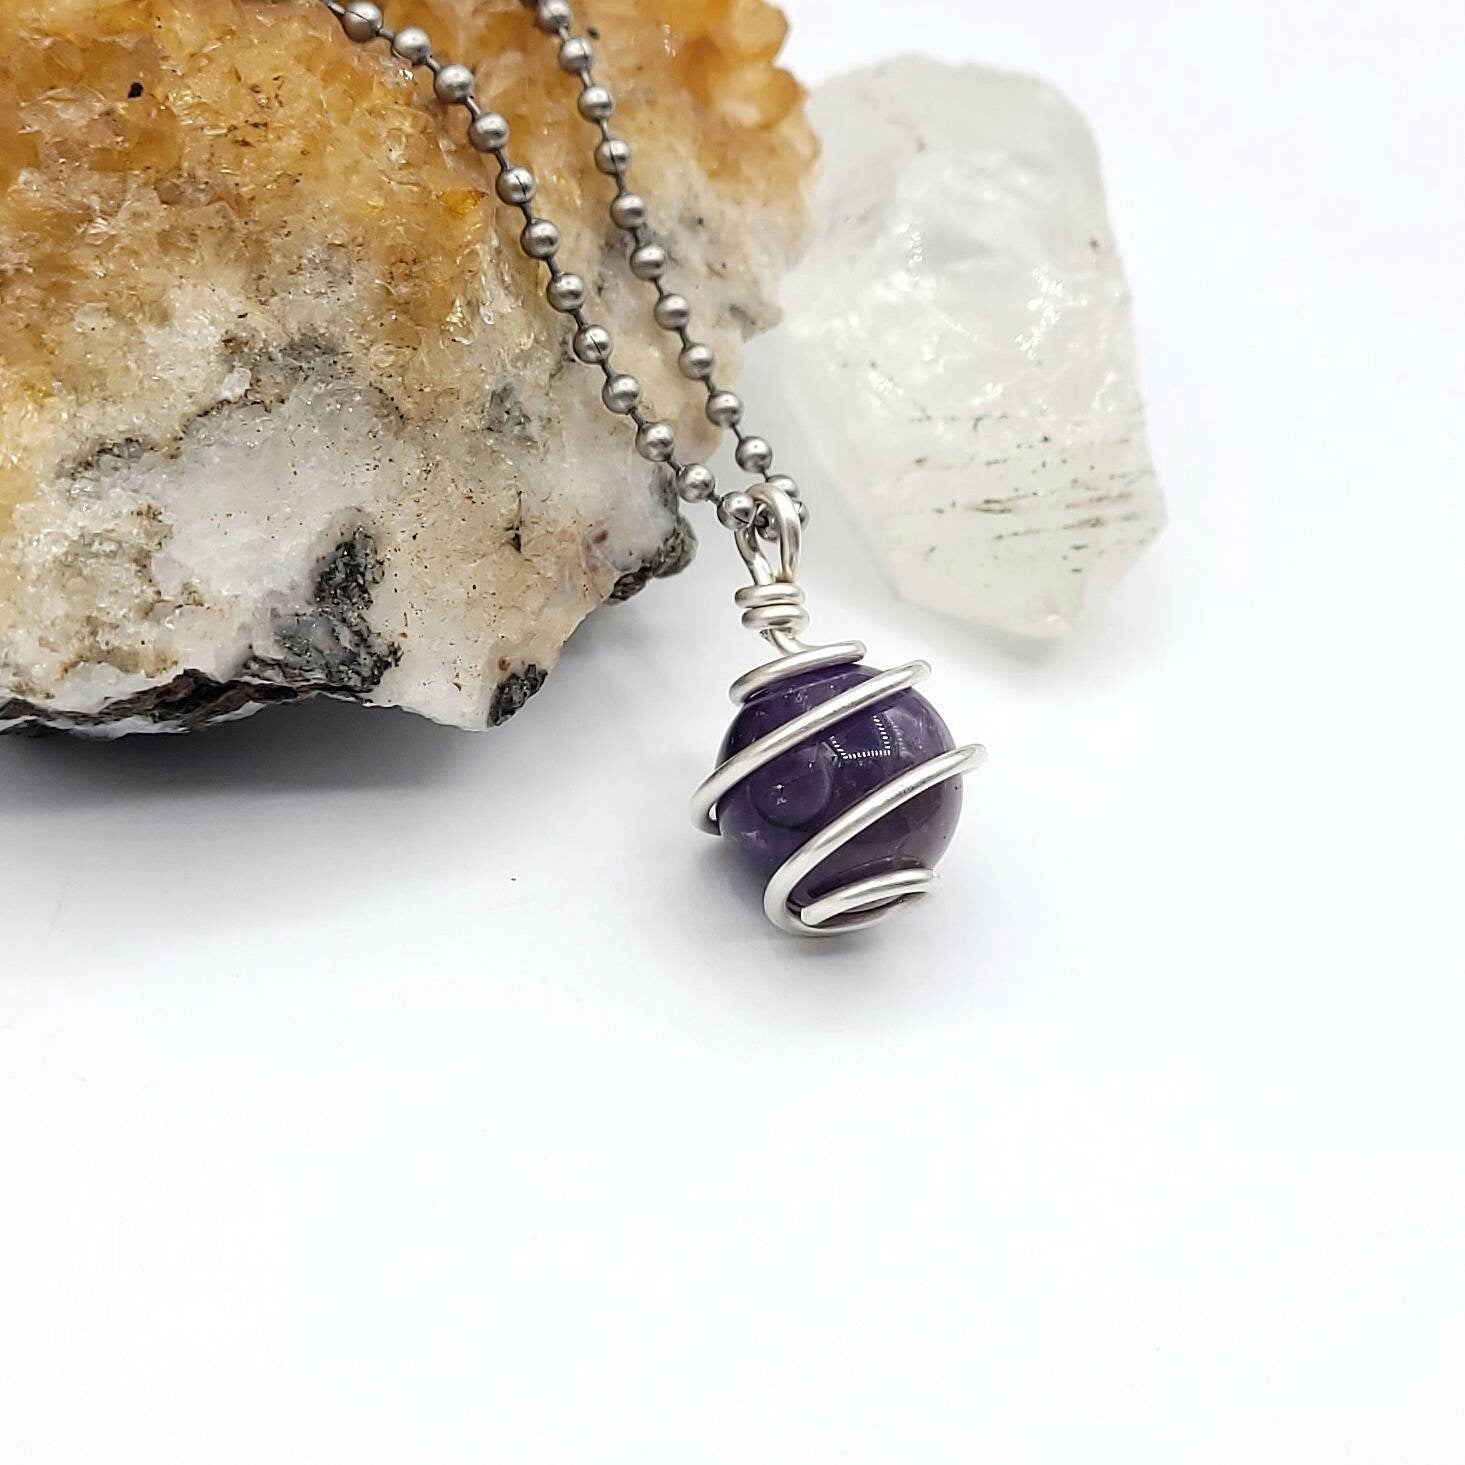 Amethyst Sphere Necklace, Silver Wire Wrapped Amethyst Pendant